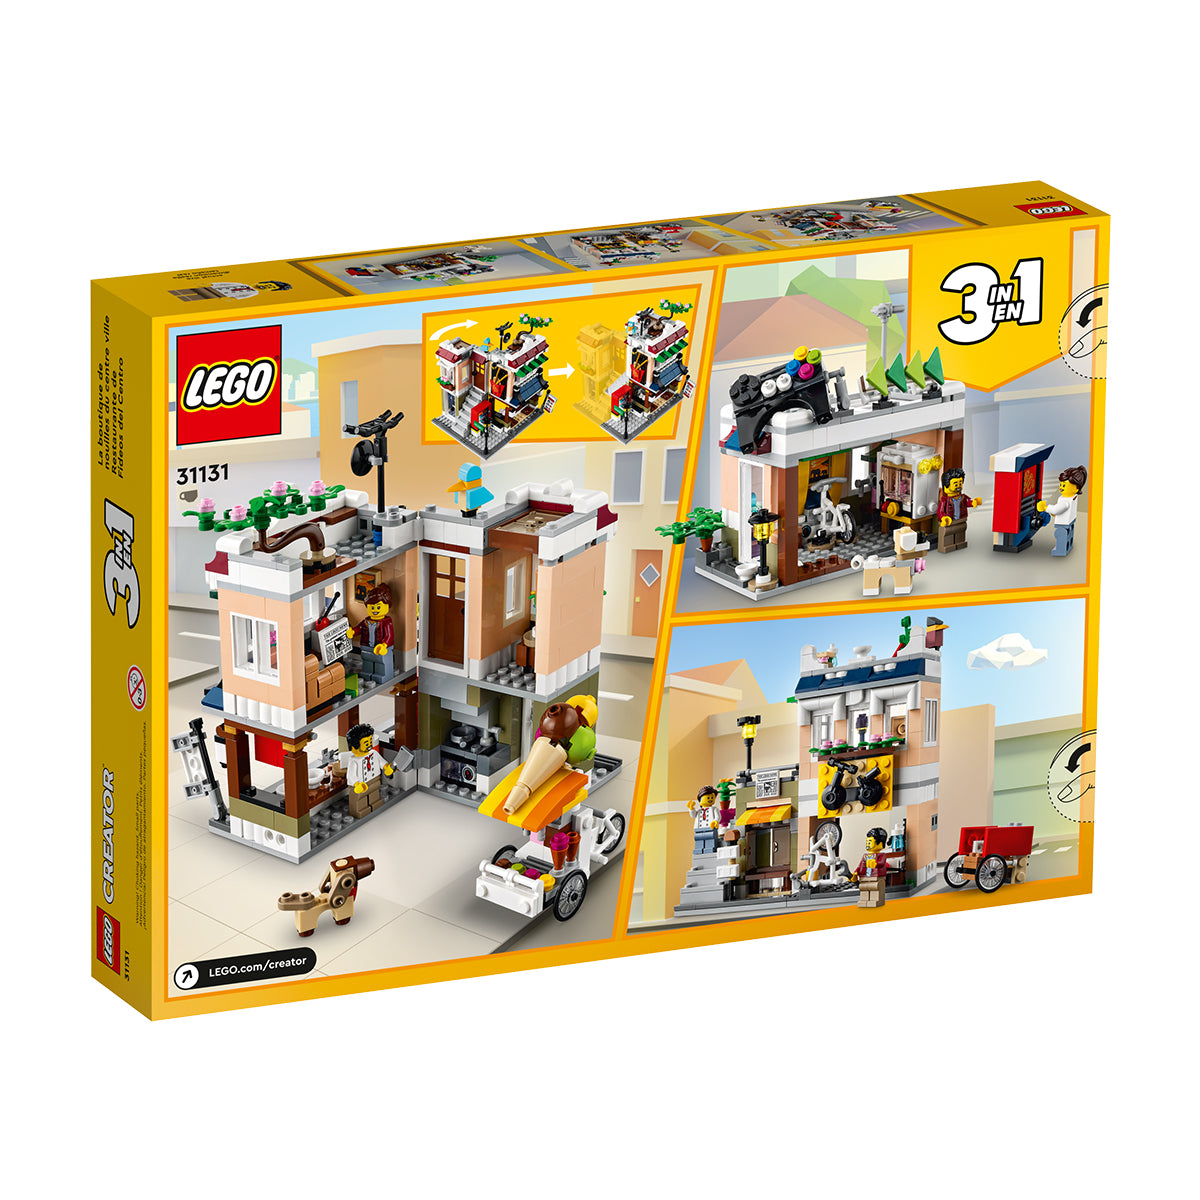 LEGO Creator 3 In 1 - Downtown Noodle Shop 31131